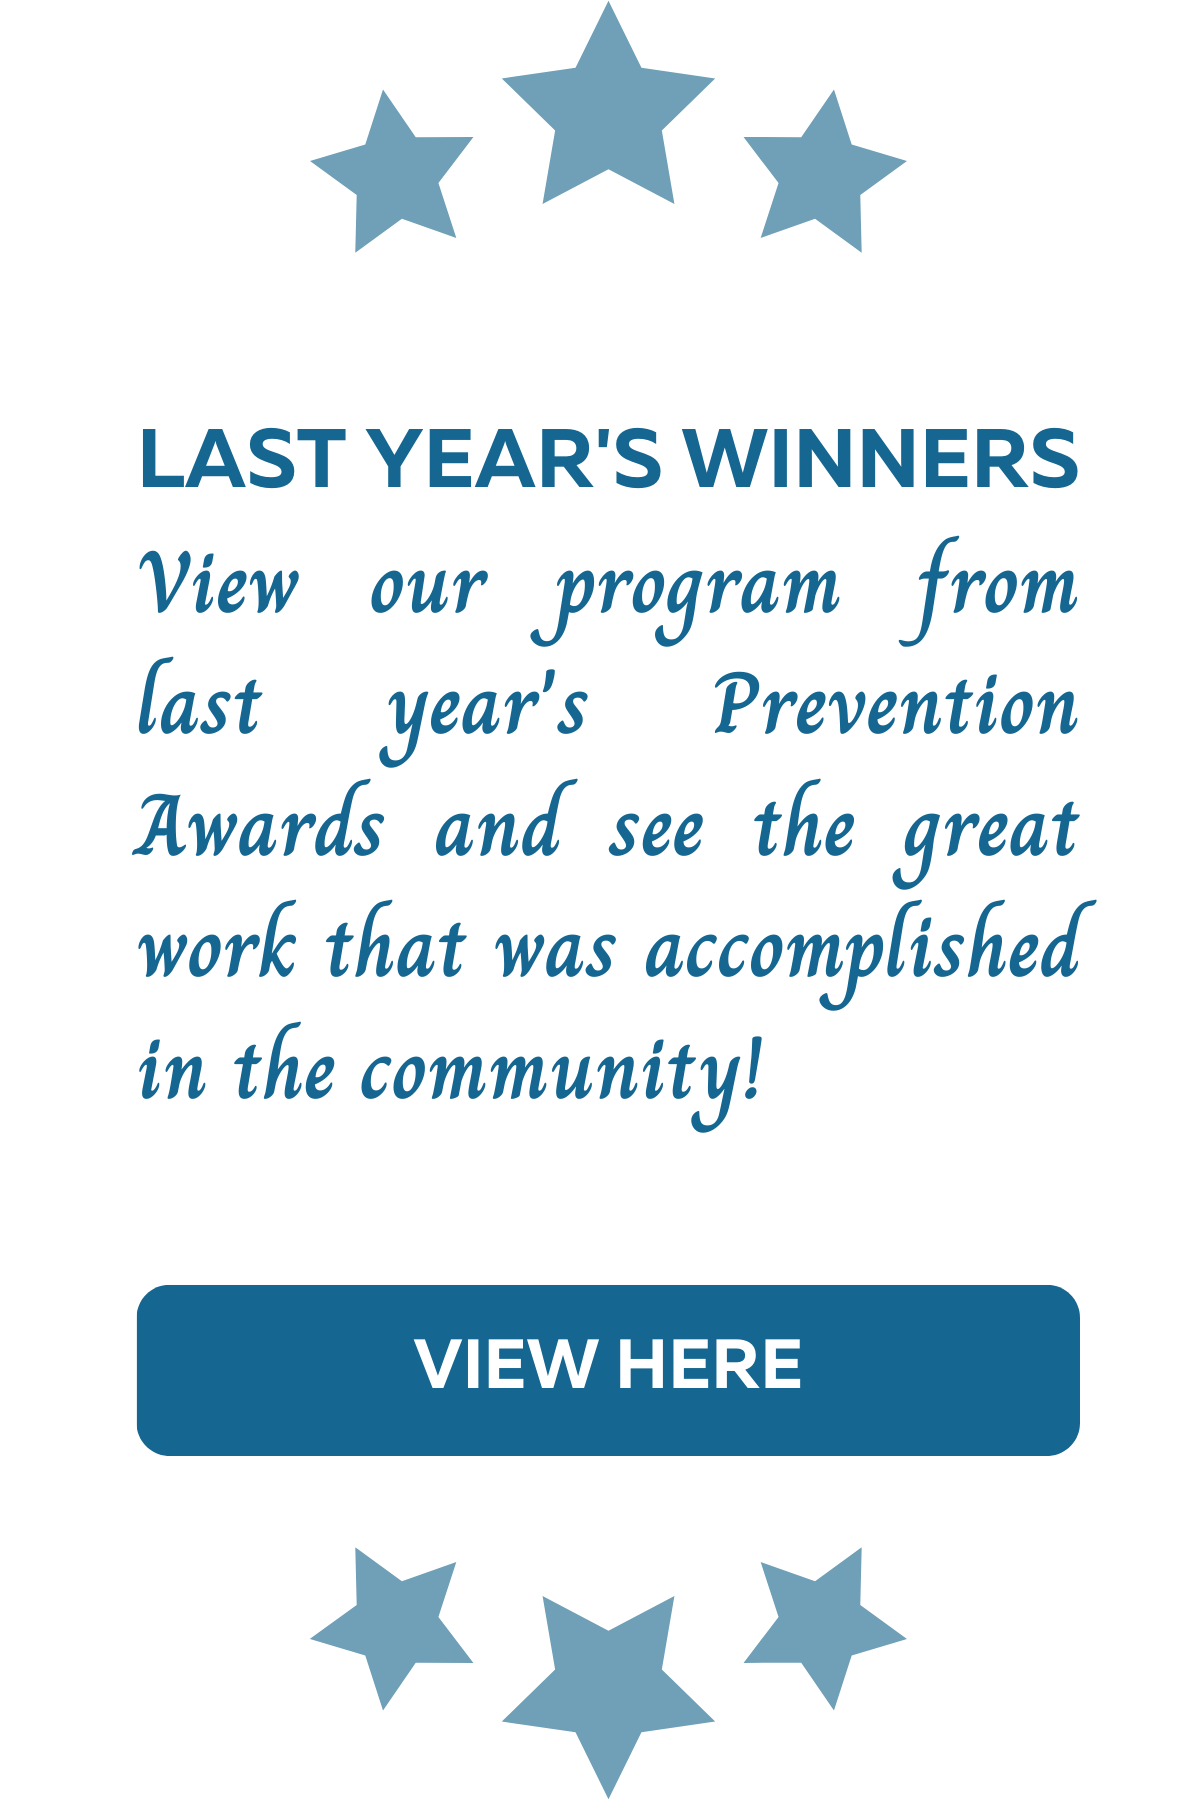 Last Year's Winners: View our program from last year's Prevention Awards and see the great work that was accomplished in the county! View here